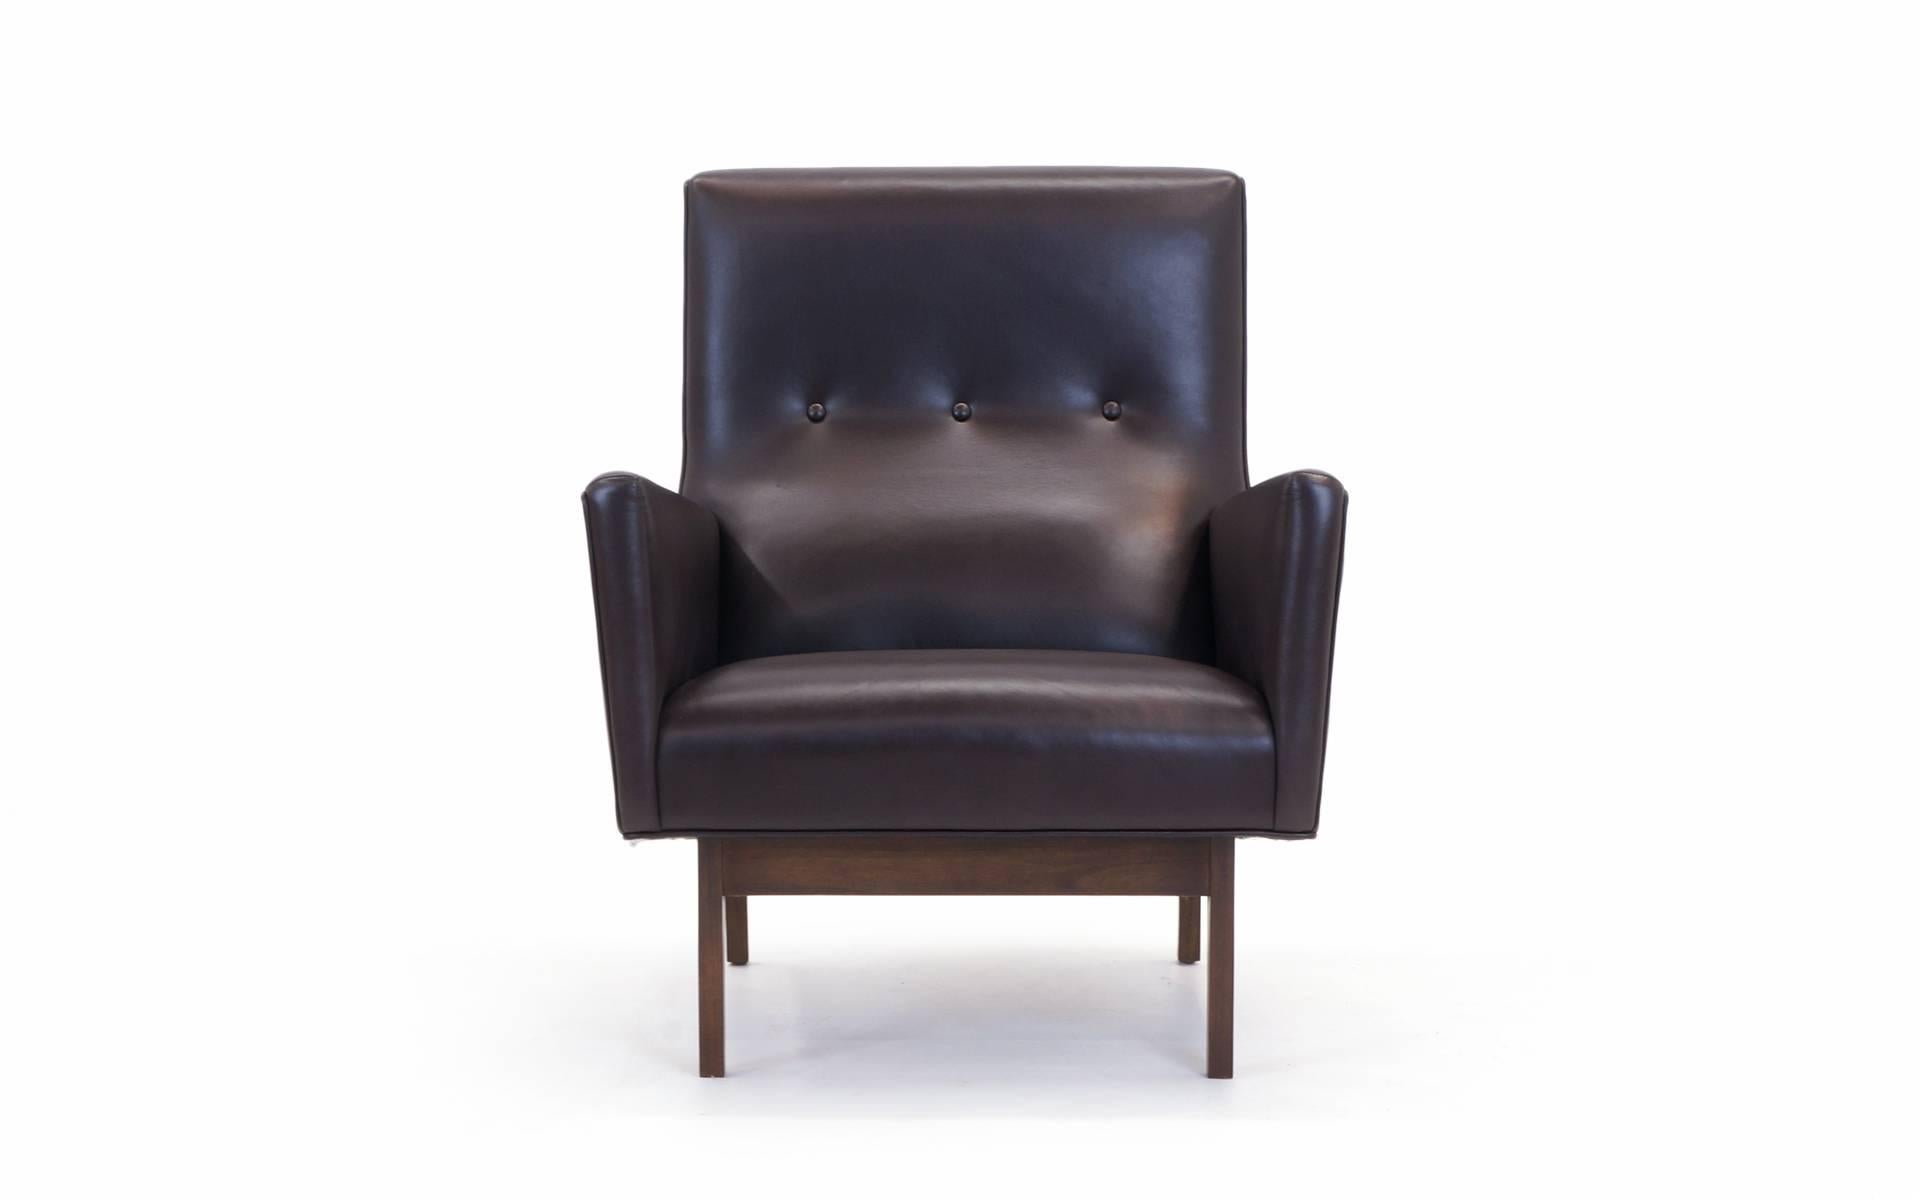 Based on a design by Jens Risom, this is a custom built and never used lounge chair. Extremely high quality materials and construction: Walnut, hard woods, and Edelman chocolate brown leather. Very comfortable with added lumbar support.